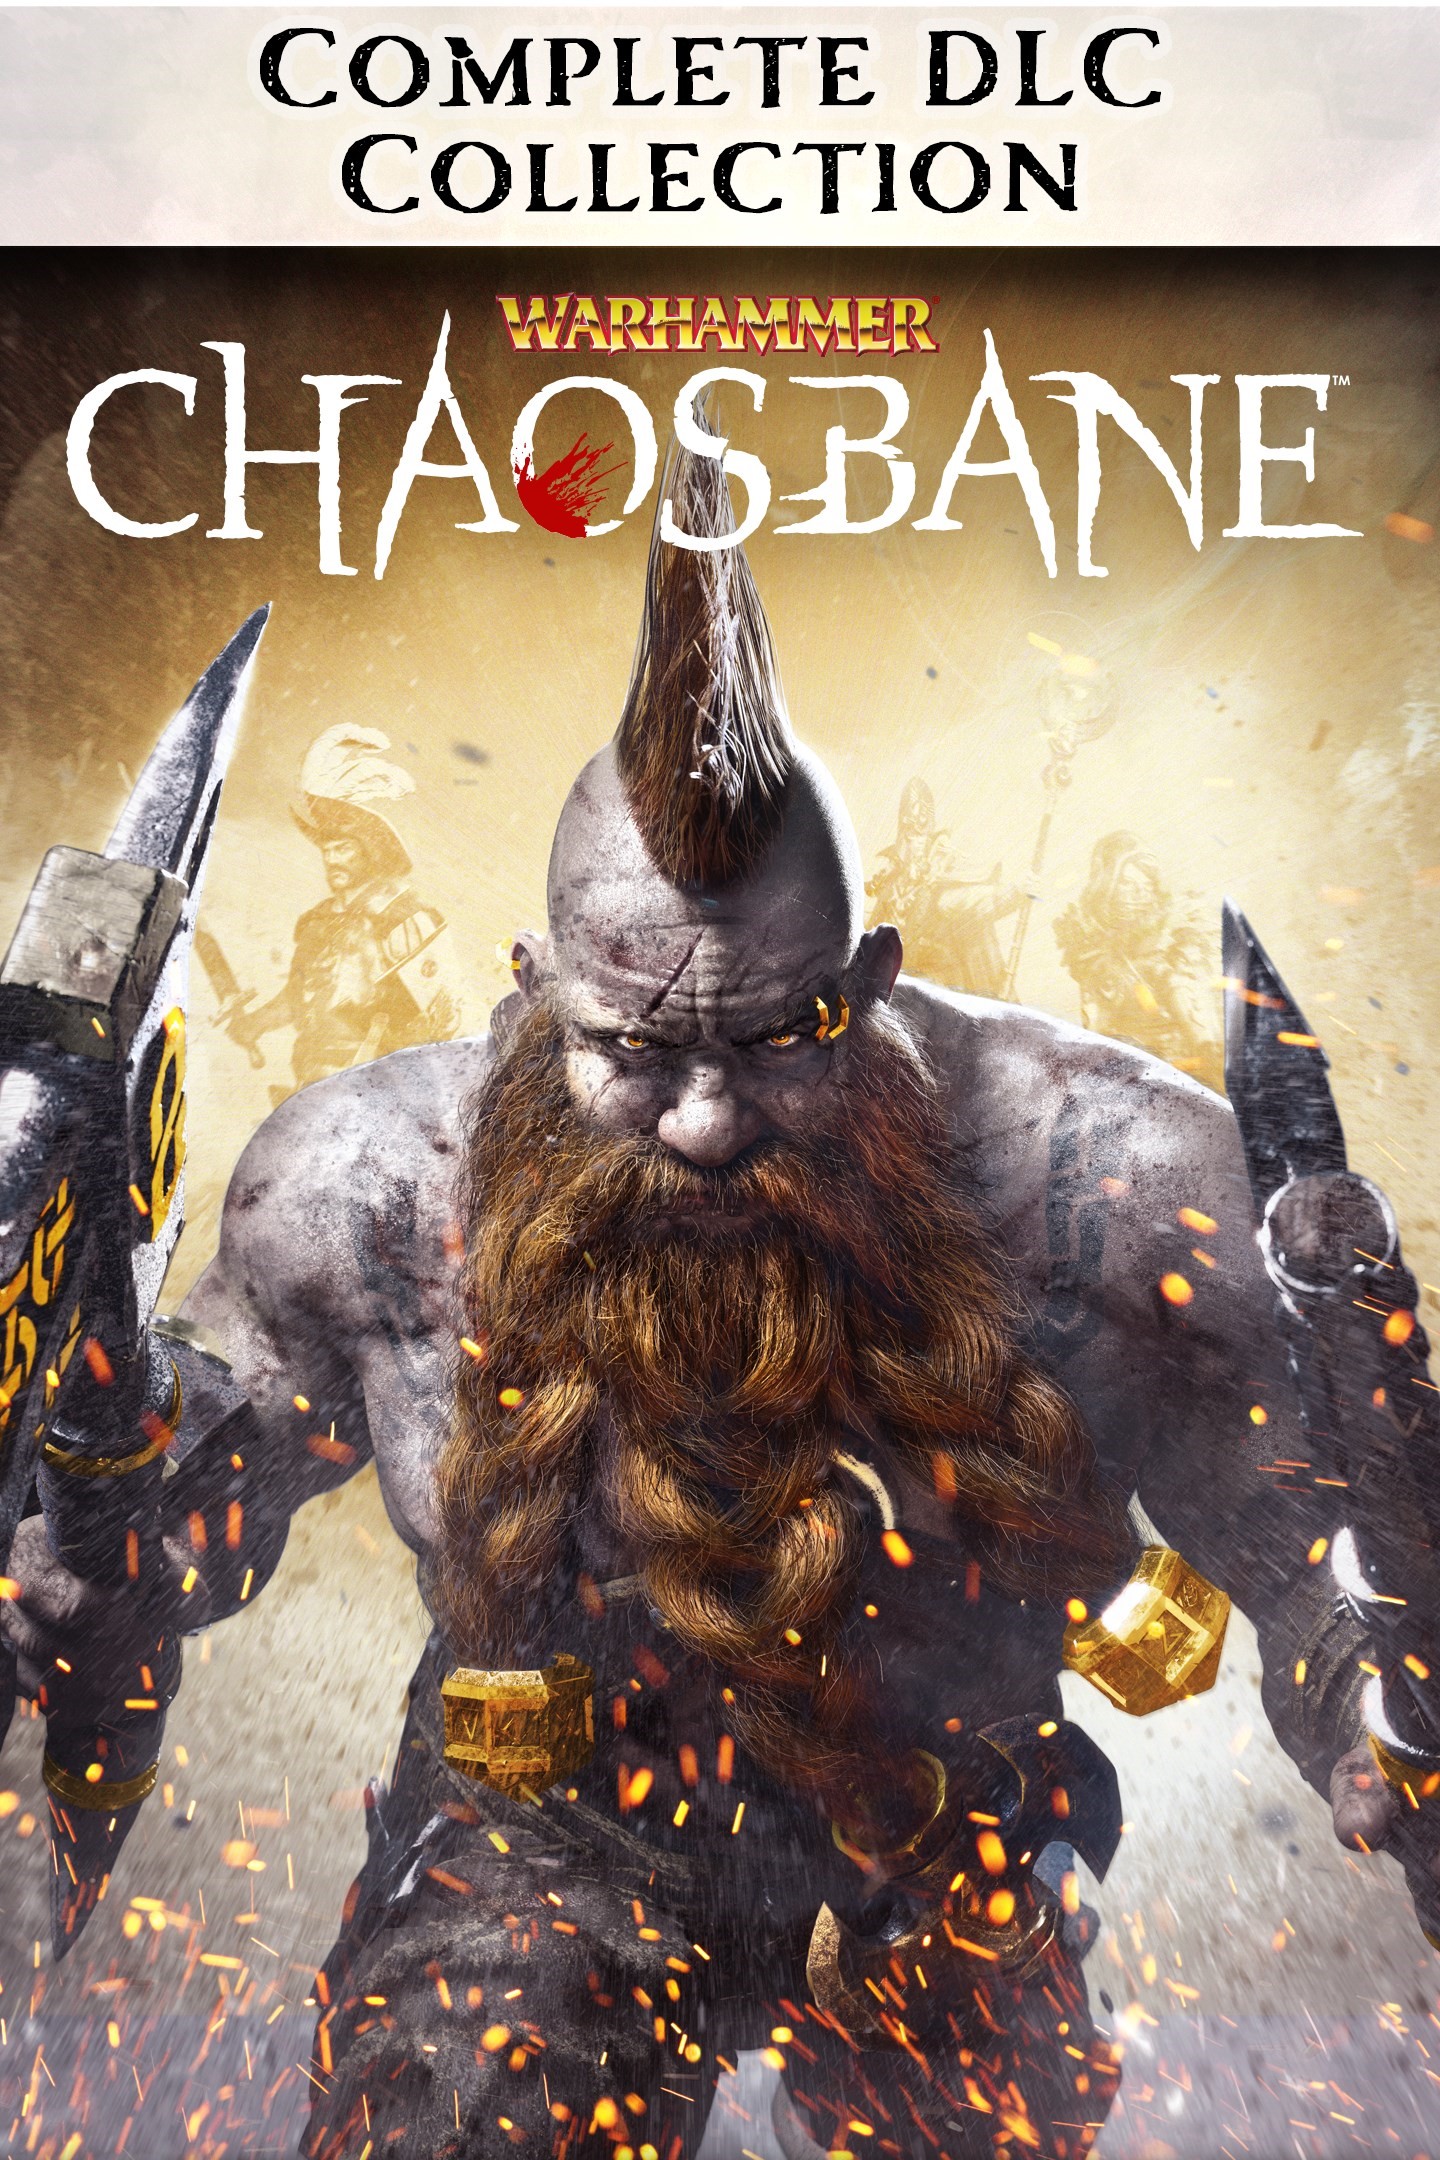 Warhammer: Chaosbane Complete DLC Collection/Xbox